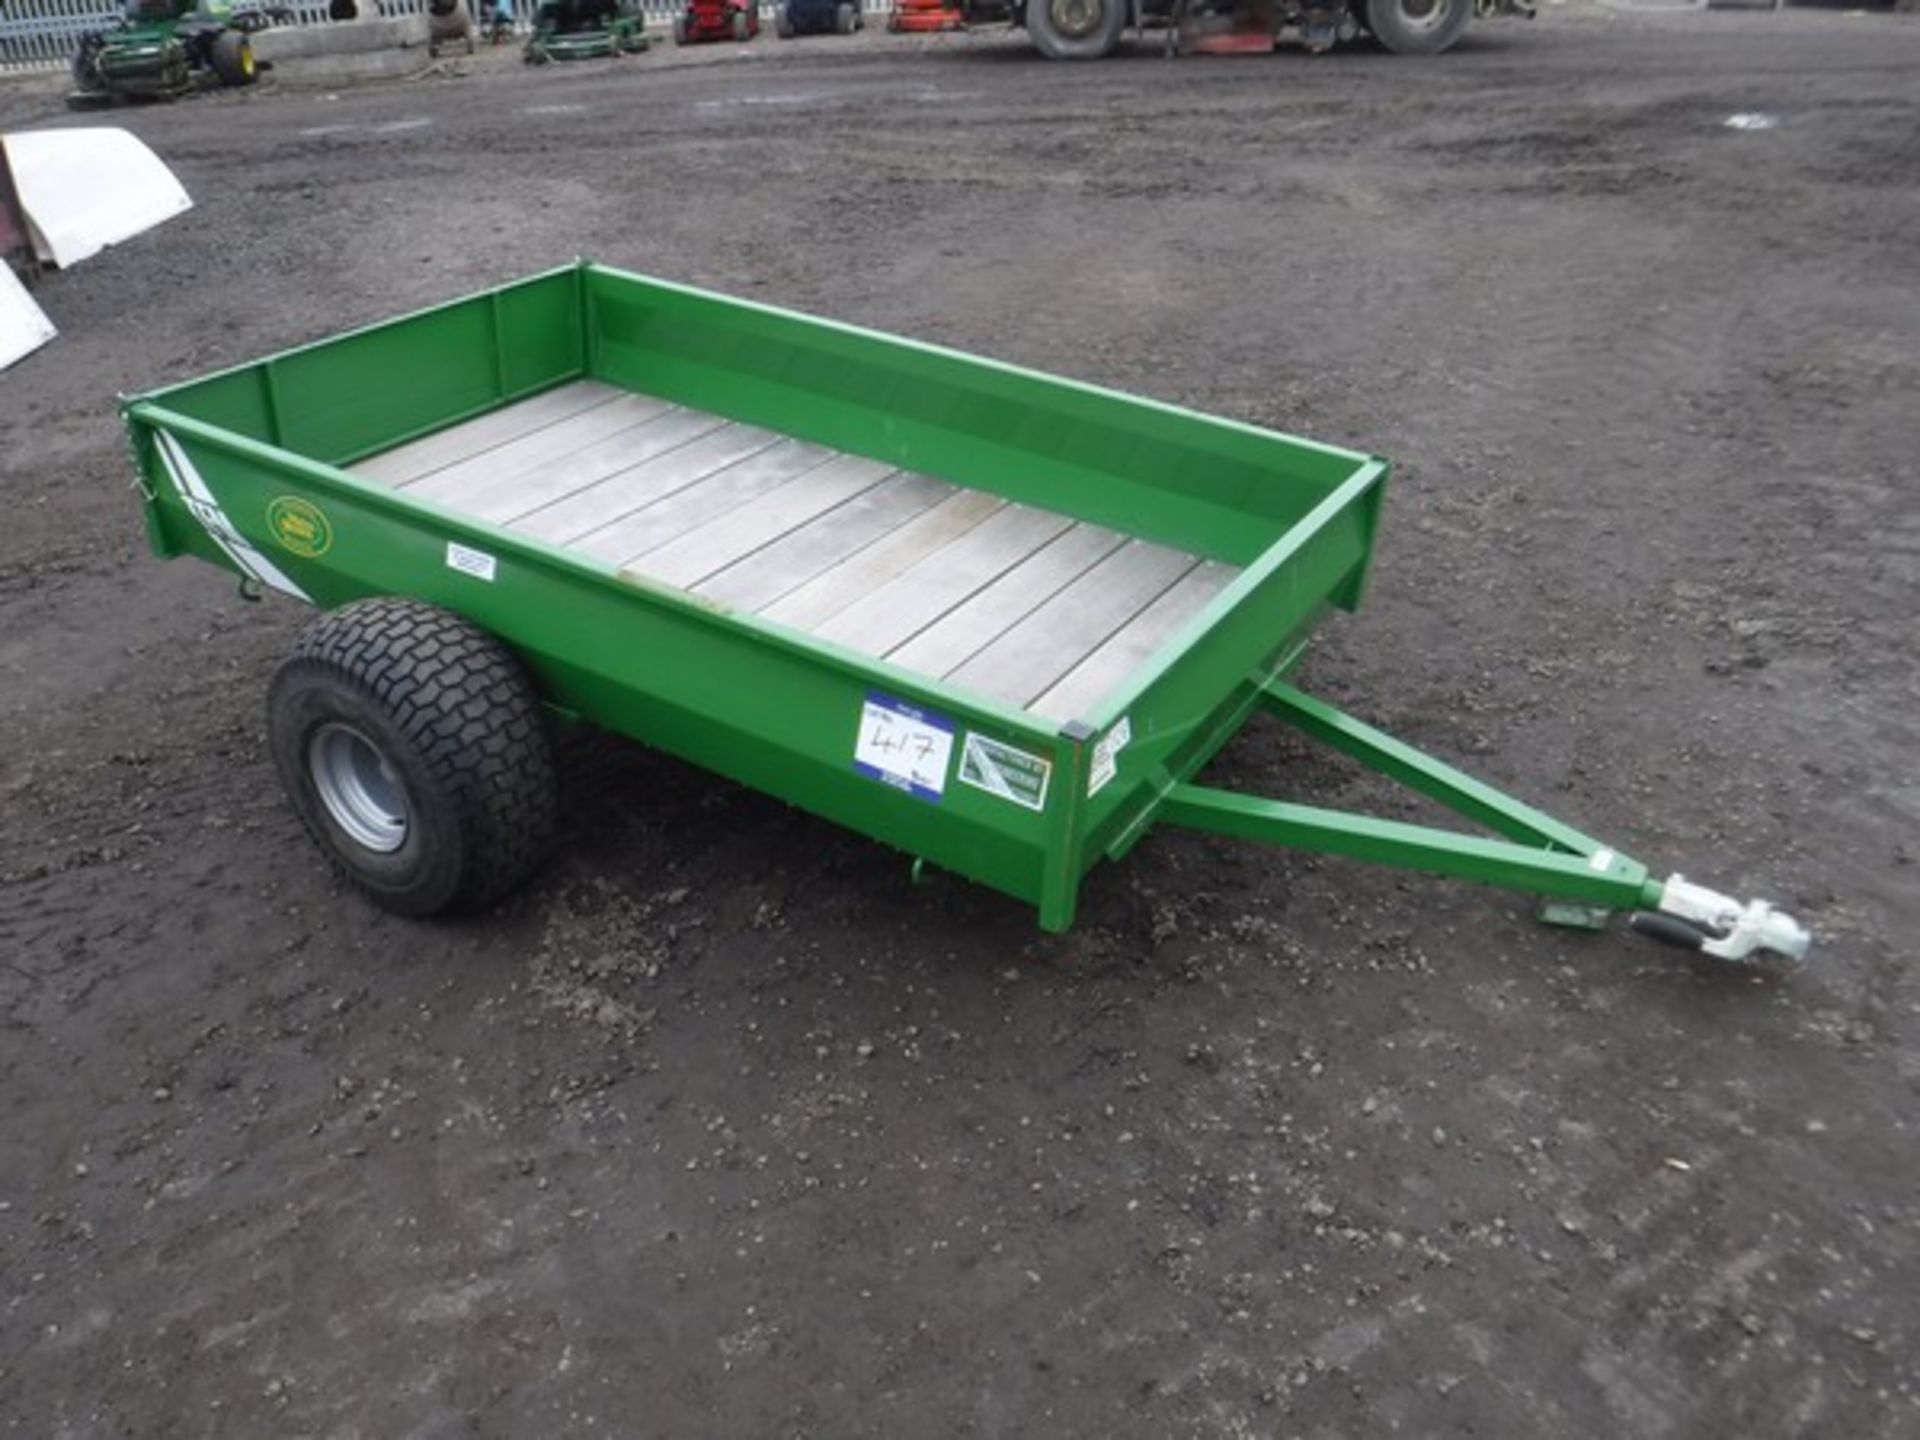 TFM GROUNDS TRAILER, ID 6433, SINGLE AXLE - Image 6 of 6